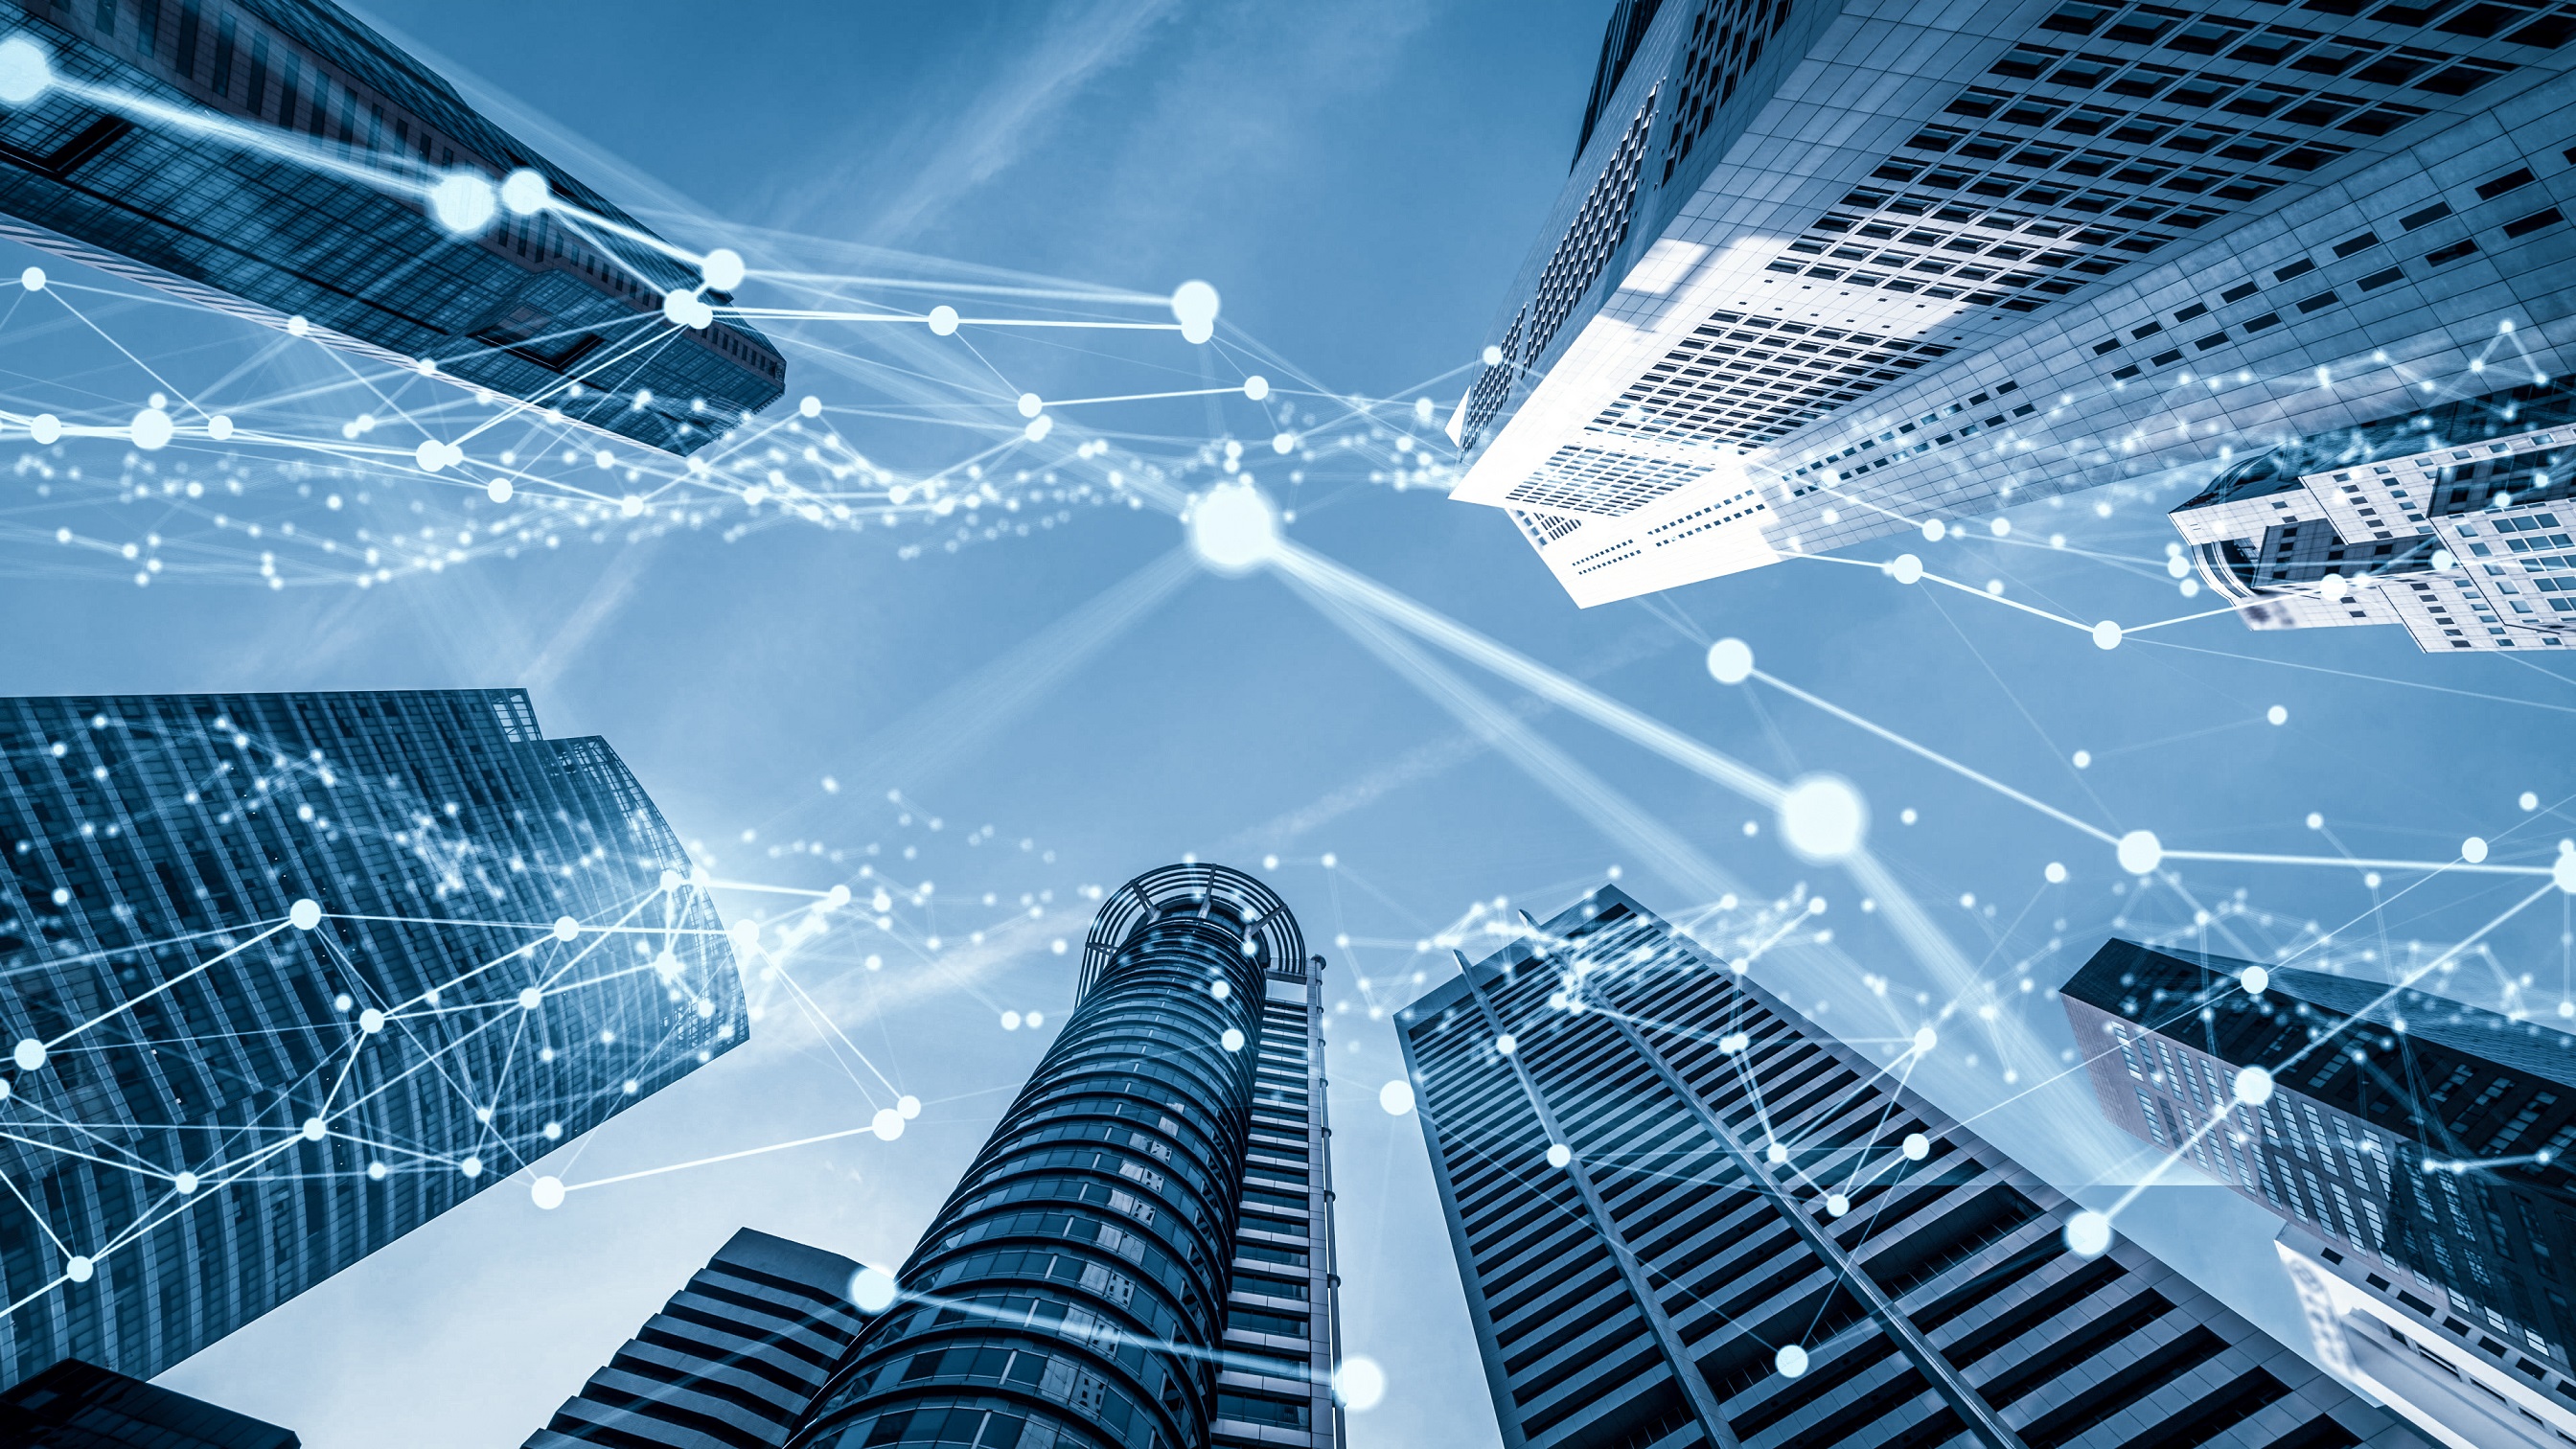 Smart Connected Buildings. Image Source: Adobe Stock